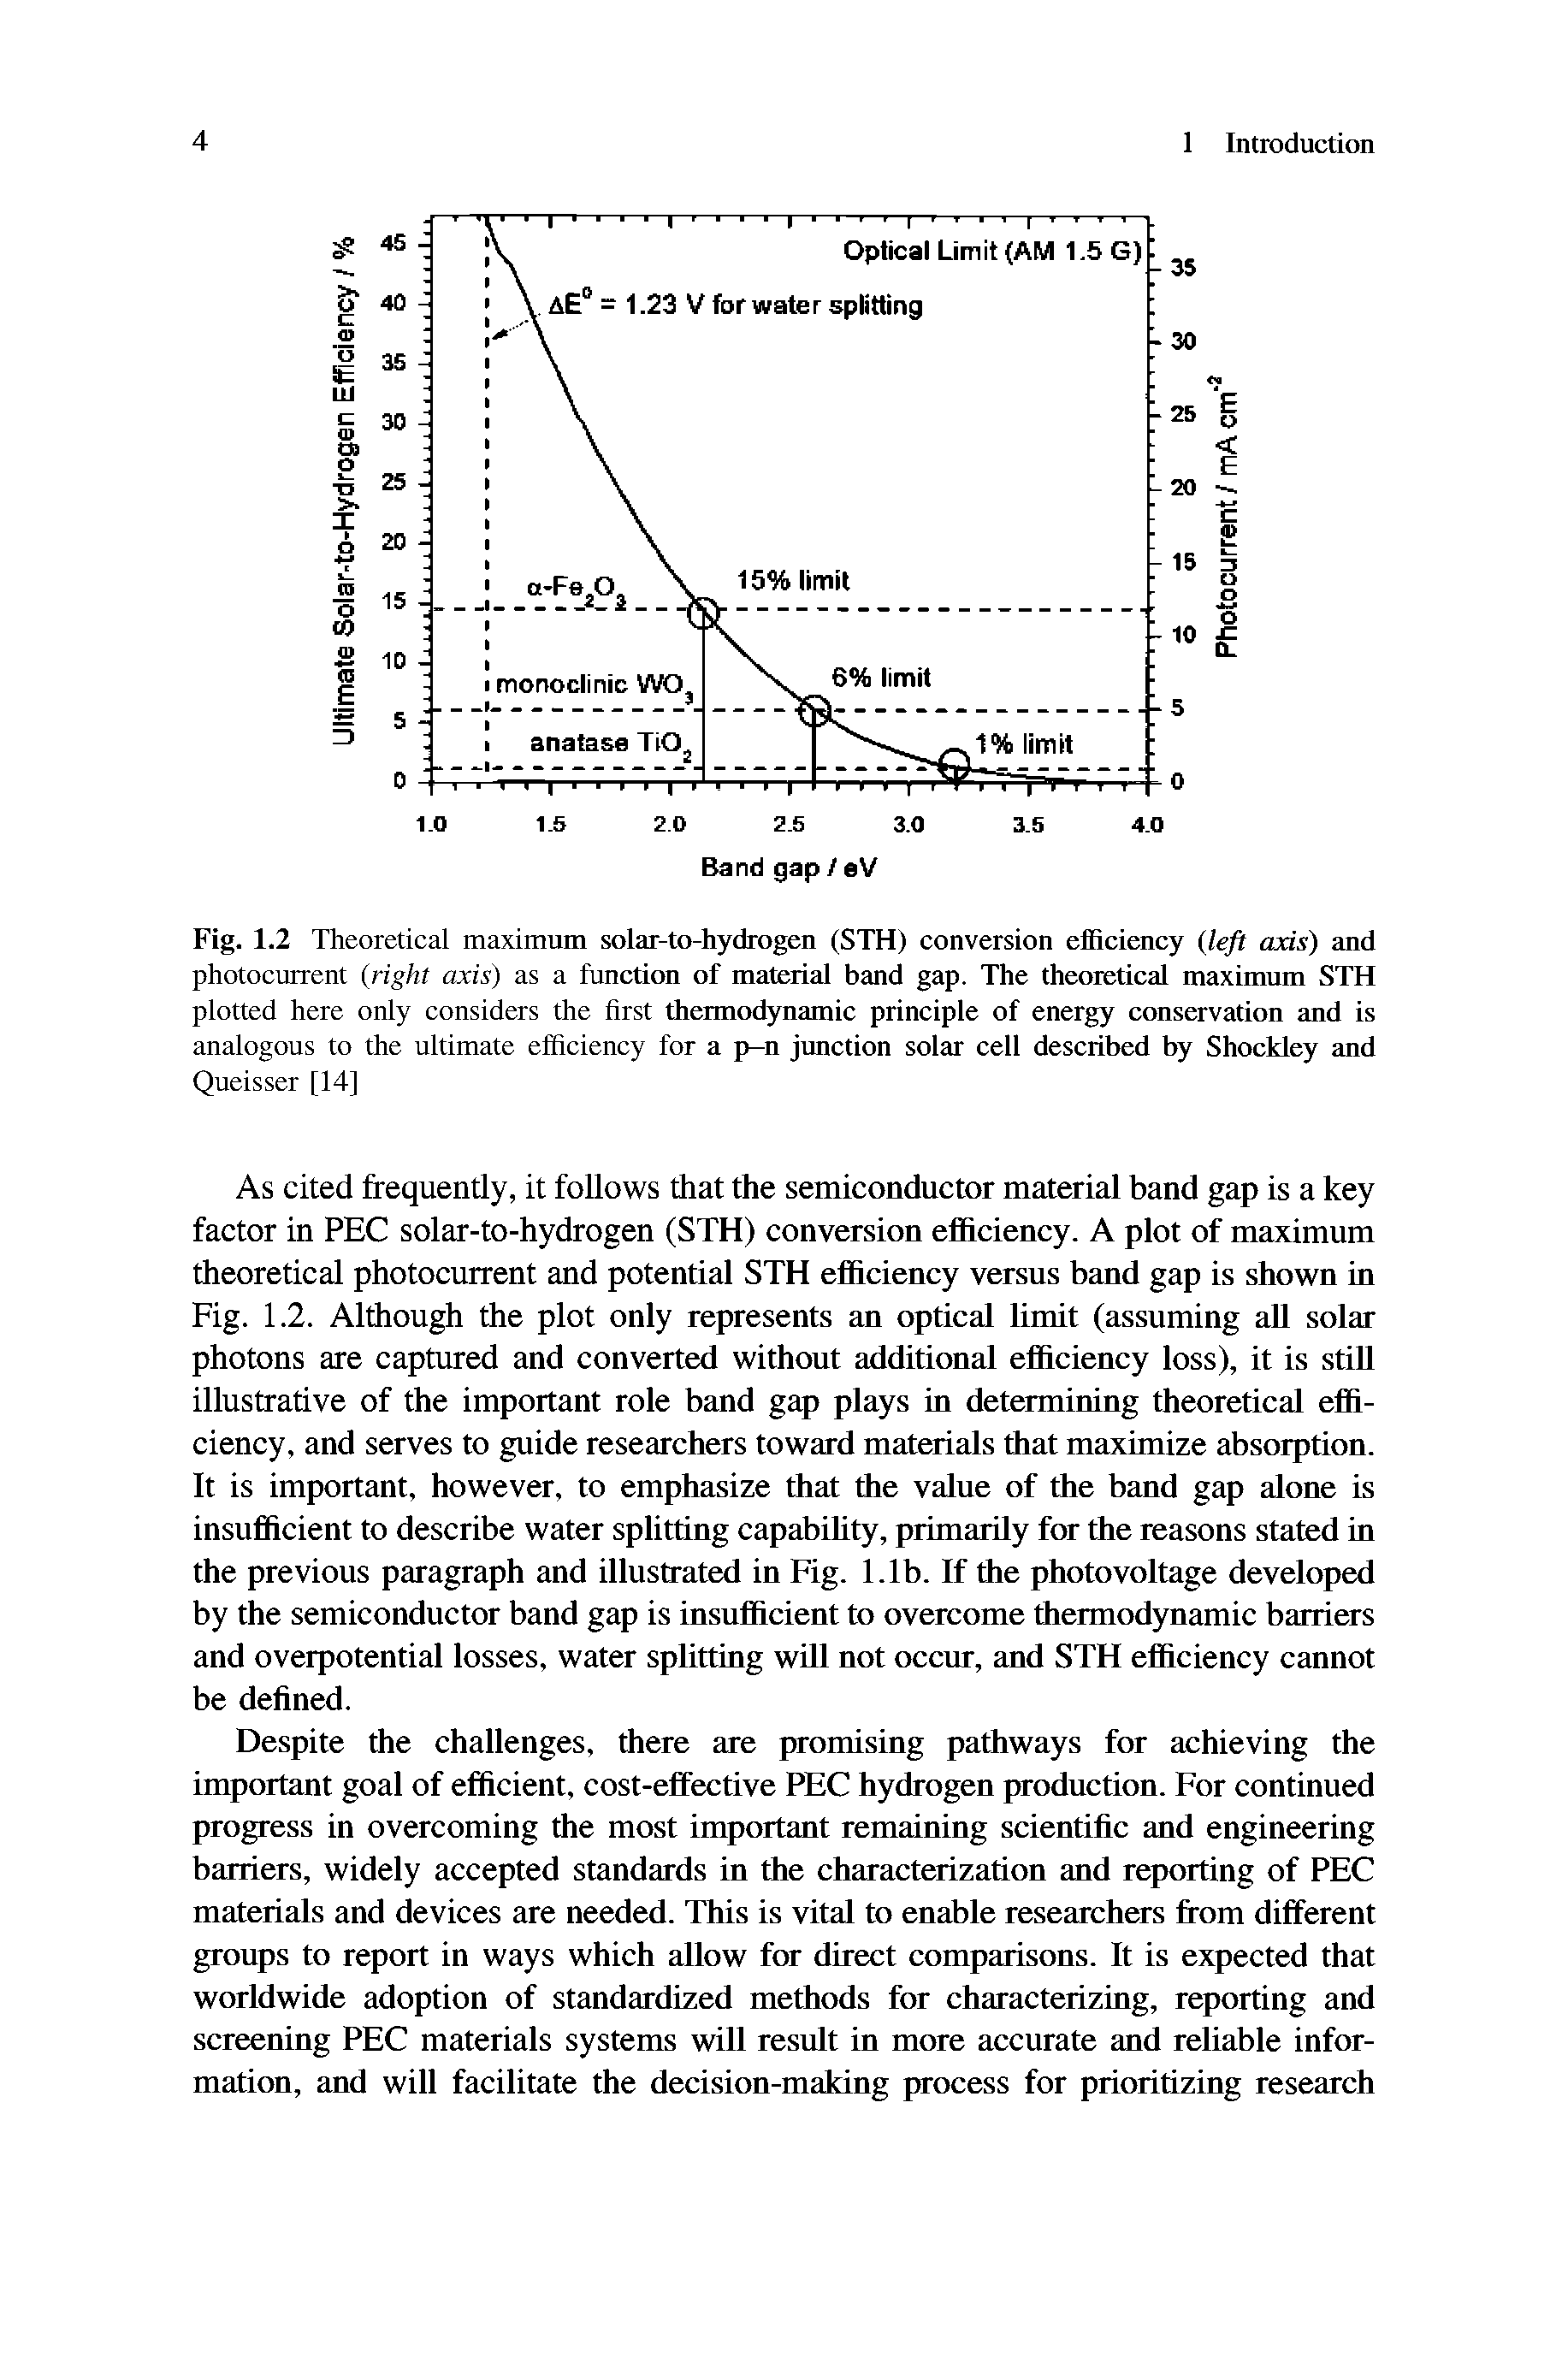 Fig. 1.2 Theoretical maximum solar-to-hydrogen (STH) conversion efficiency (left axis) and photocurrent (right axis) as a function of material band gap. The theoretical maximum STH plotted here only considers the first thermodynamic principle of energy conservation and is analogous to the ultimate efficiency for a p-n junction solar cell described by Shockley and Queisser [14]...